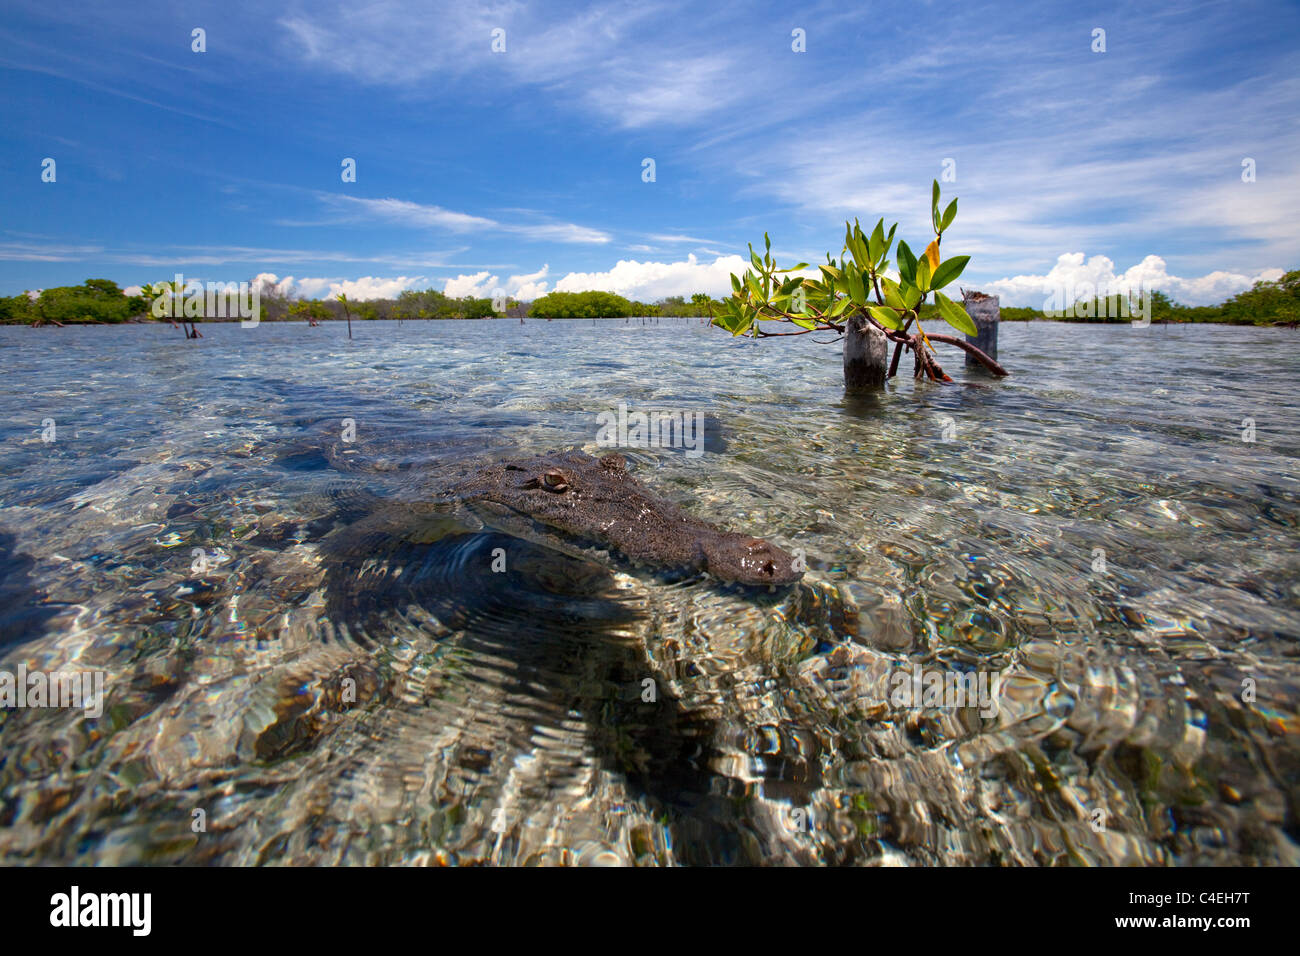 A view of a Cuban Crocodile at the surface of the water in a shallow water of a mangrove forest. Stock Photo